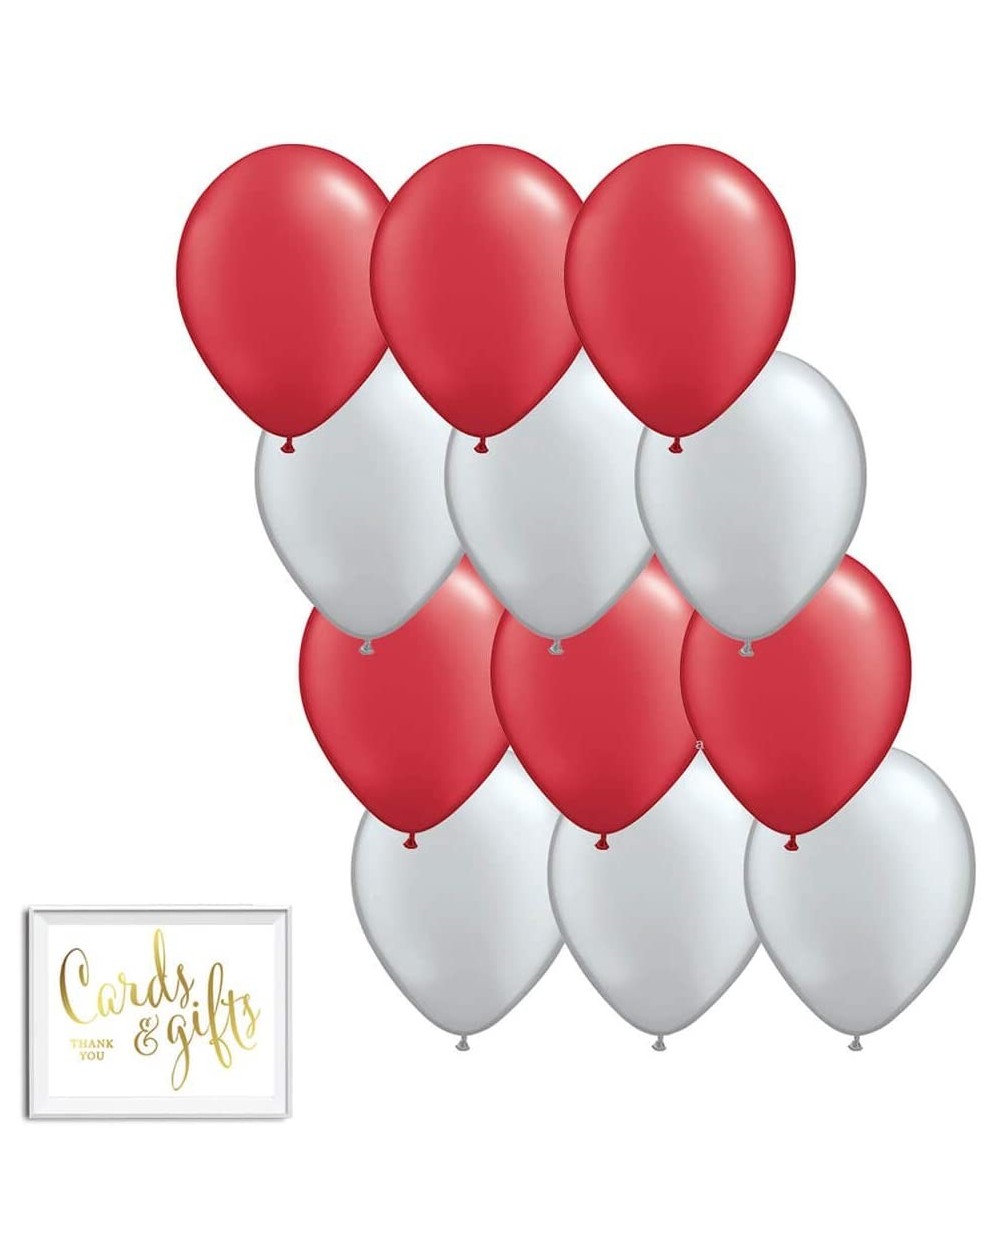 Balloons 11-inch Latex Balloon Duo Party Kit with Gold Cards & Gifts Sign- Red and Silver Gray- 12-pk - Red and Silver Gray -...